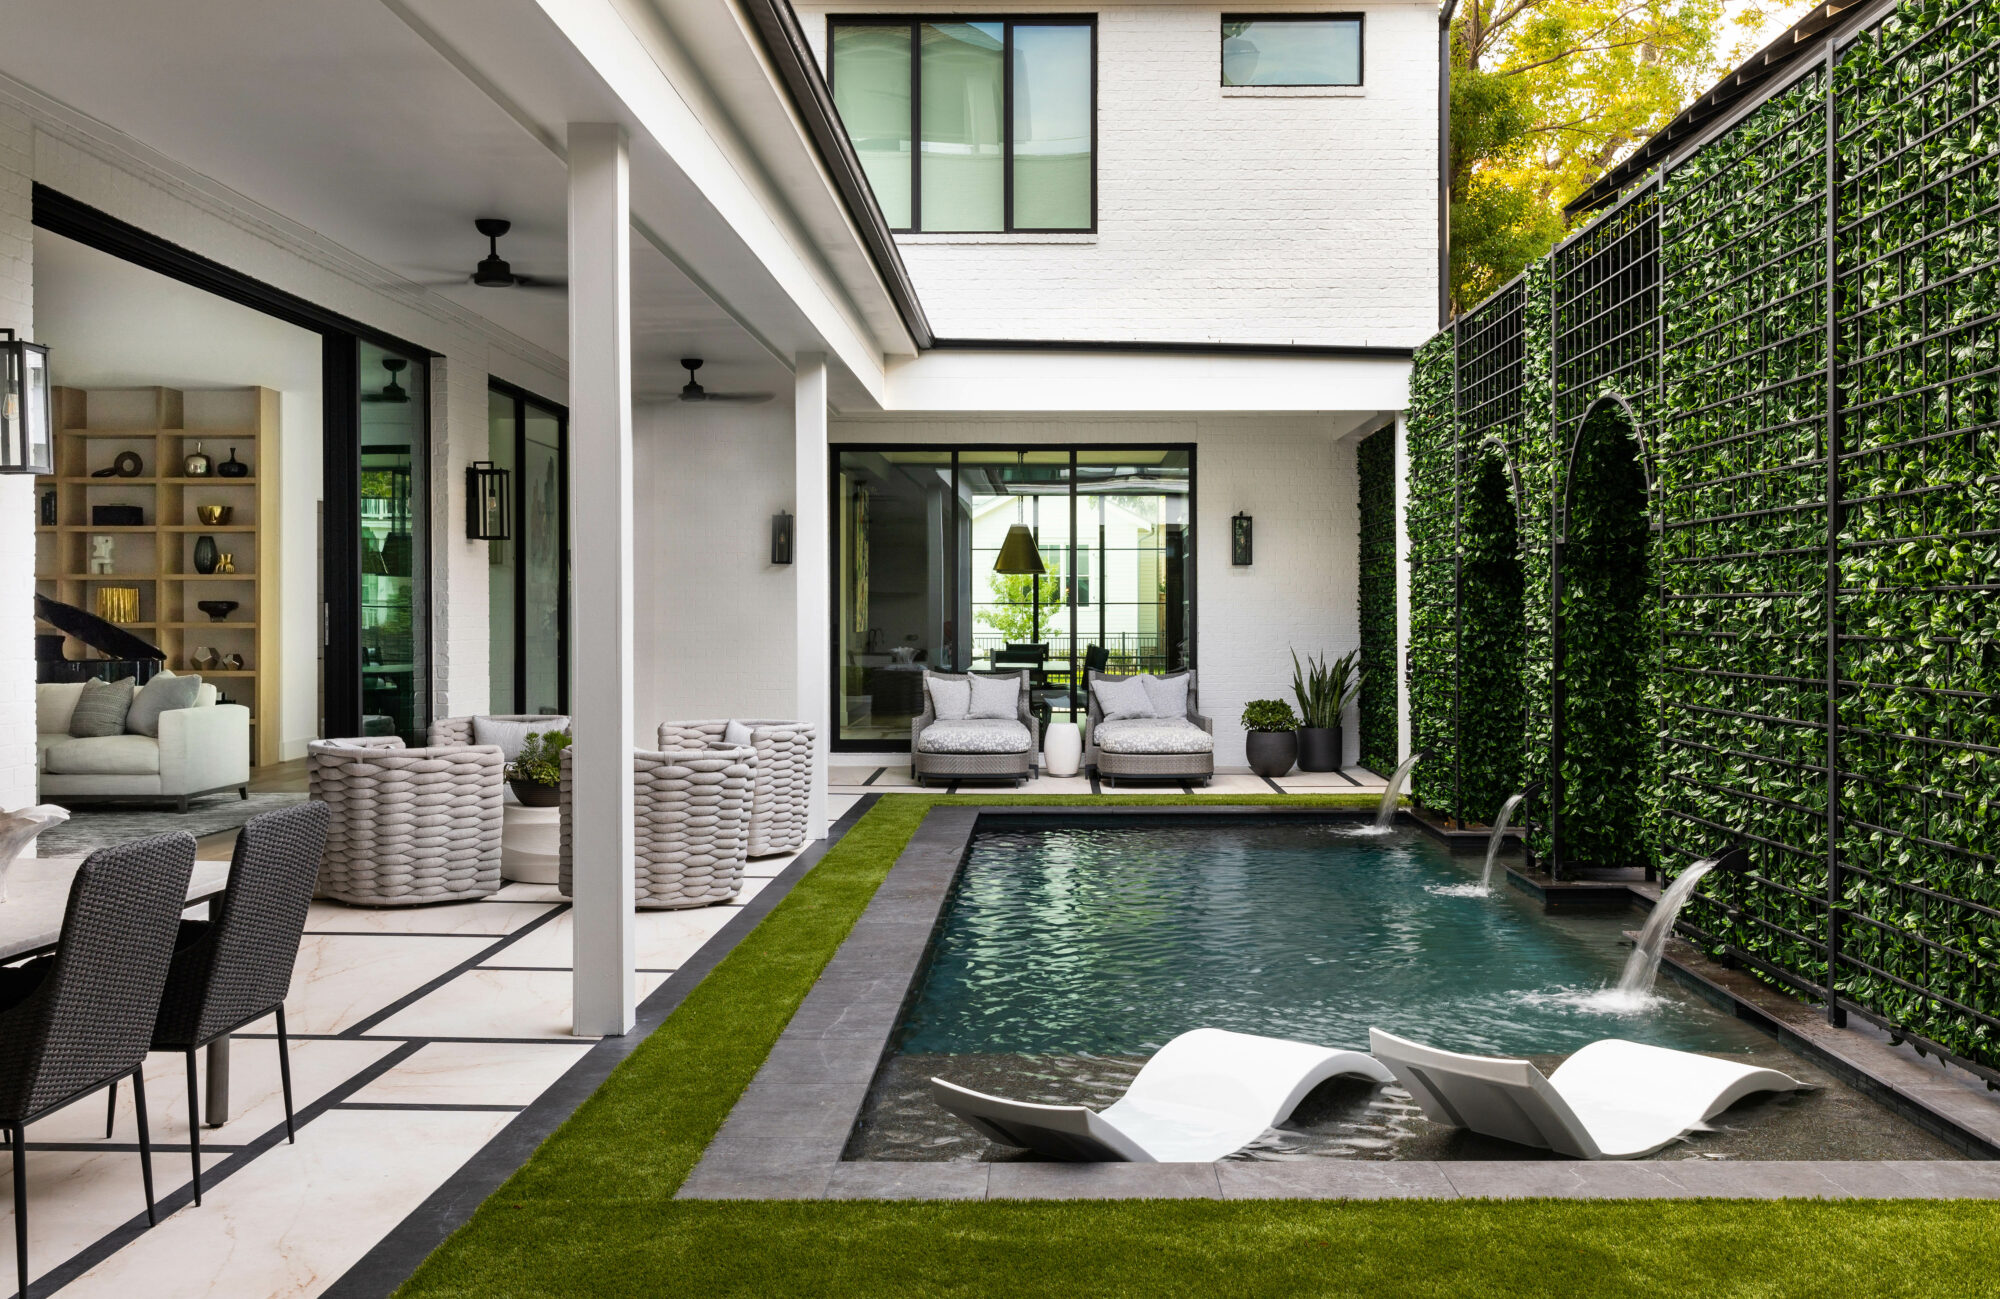 courtyard with seating areas, pool...